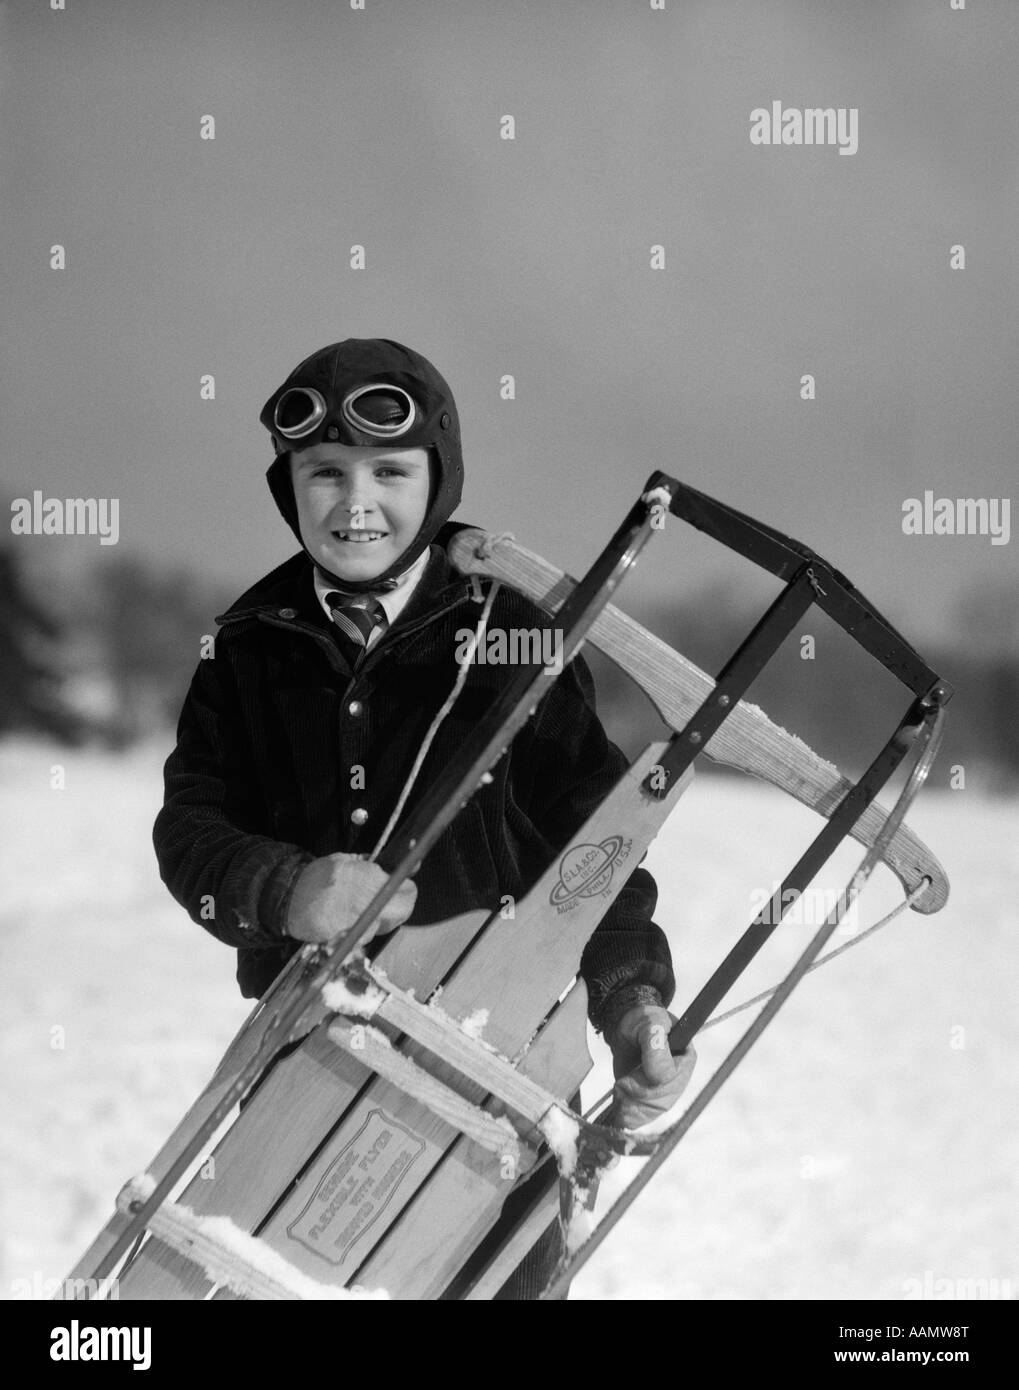 1920s 1930s SMILING BOY WEARING AVIATOR GOGGLES LEATHER FLYING HELMET HOLDING SLED STANDING IN SNOW FIELD LOOKING AT CAMERA Stock Photo